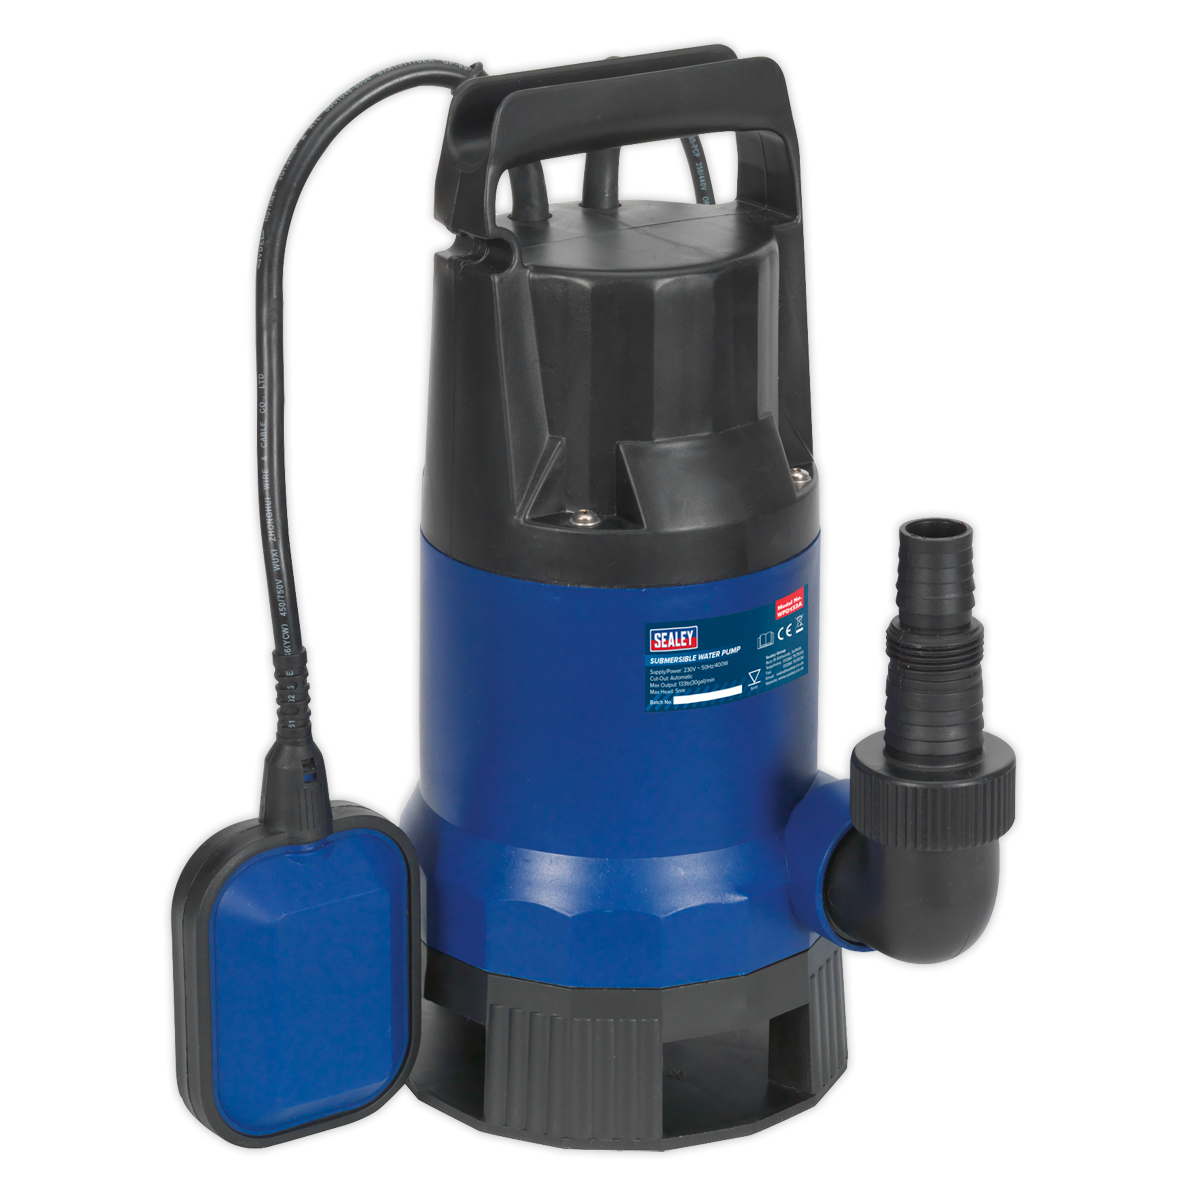 Sealey Submersible Dirty Water Pump Automatic 133L/min 230V